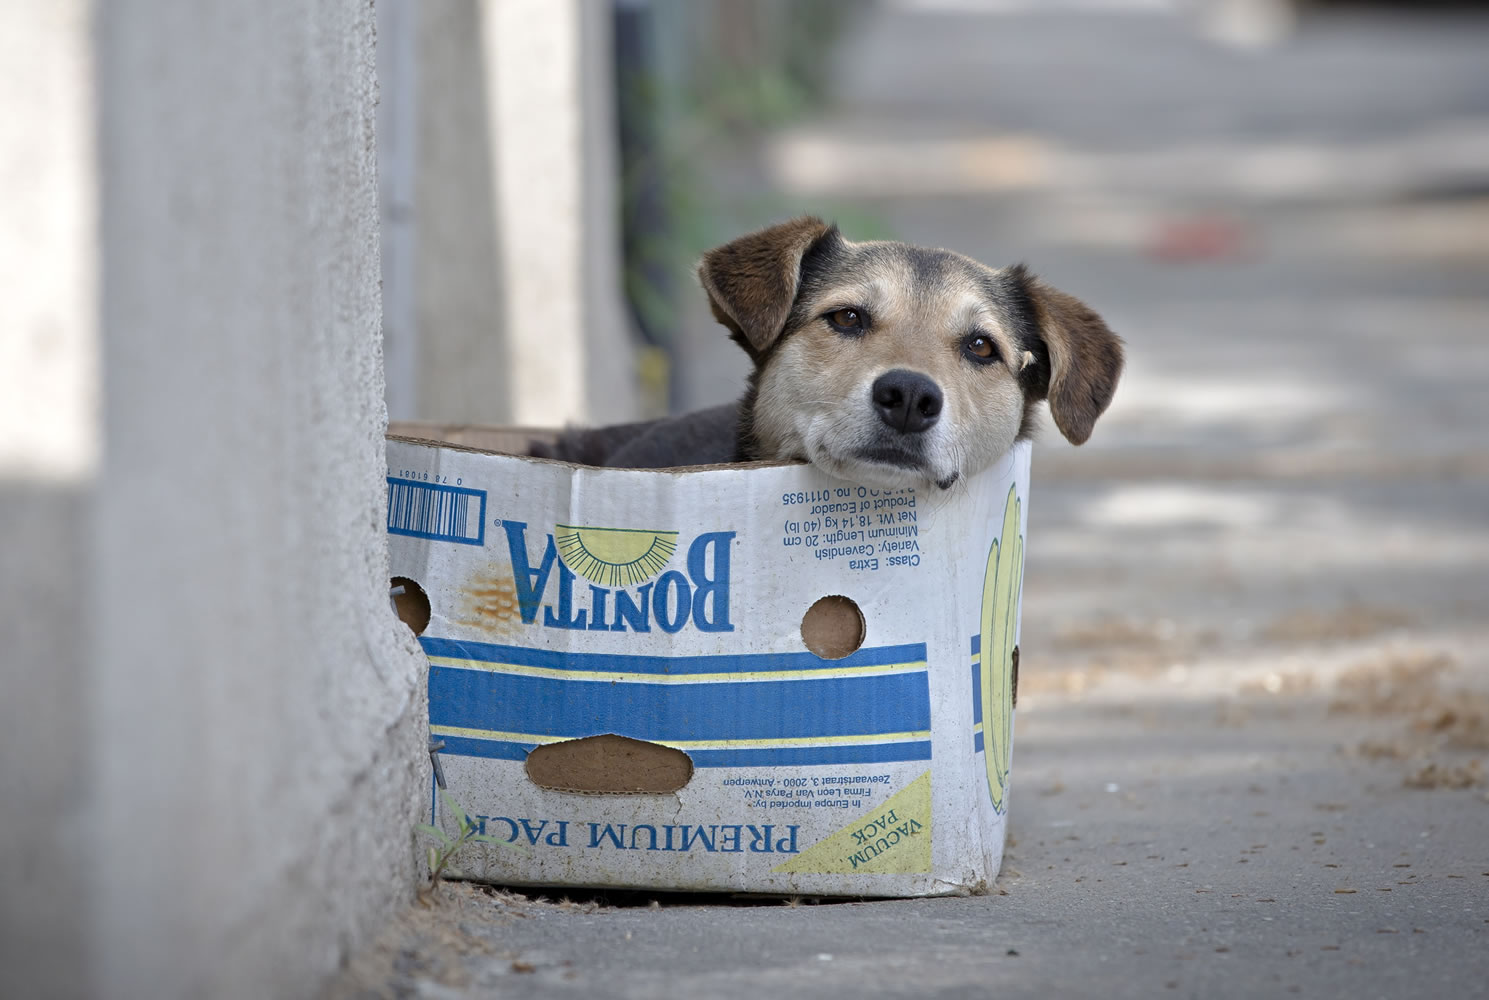 A street dog sits in a cardboard box in Bucharest, Romania, where the stray dog population has been estimated at about 65,000.